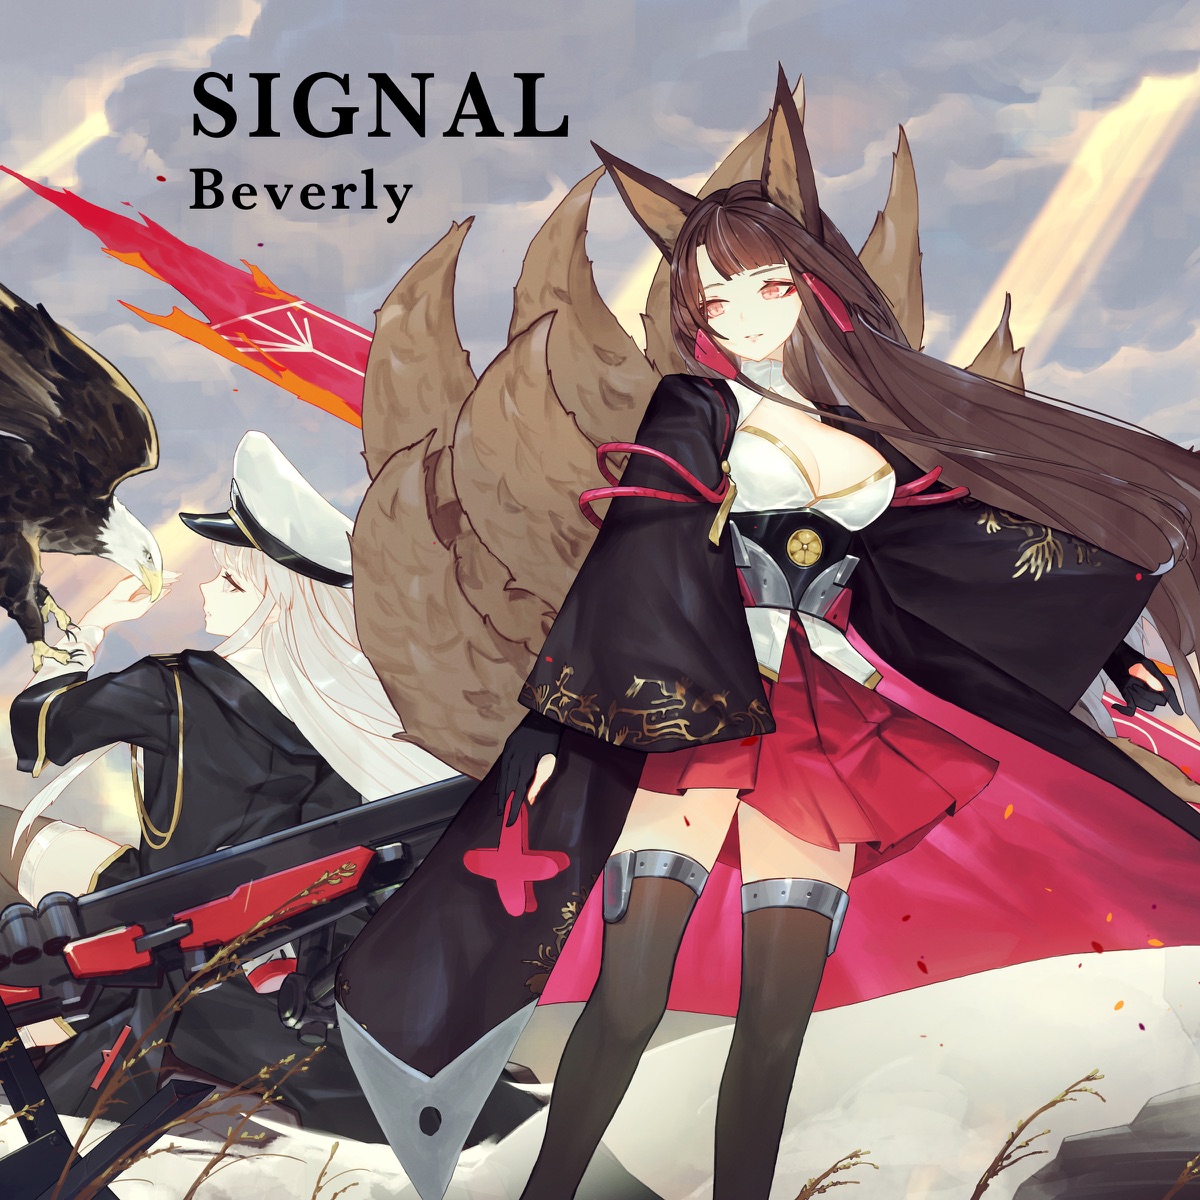 Cover art for『Beverly - Signal』from the release『Signal』